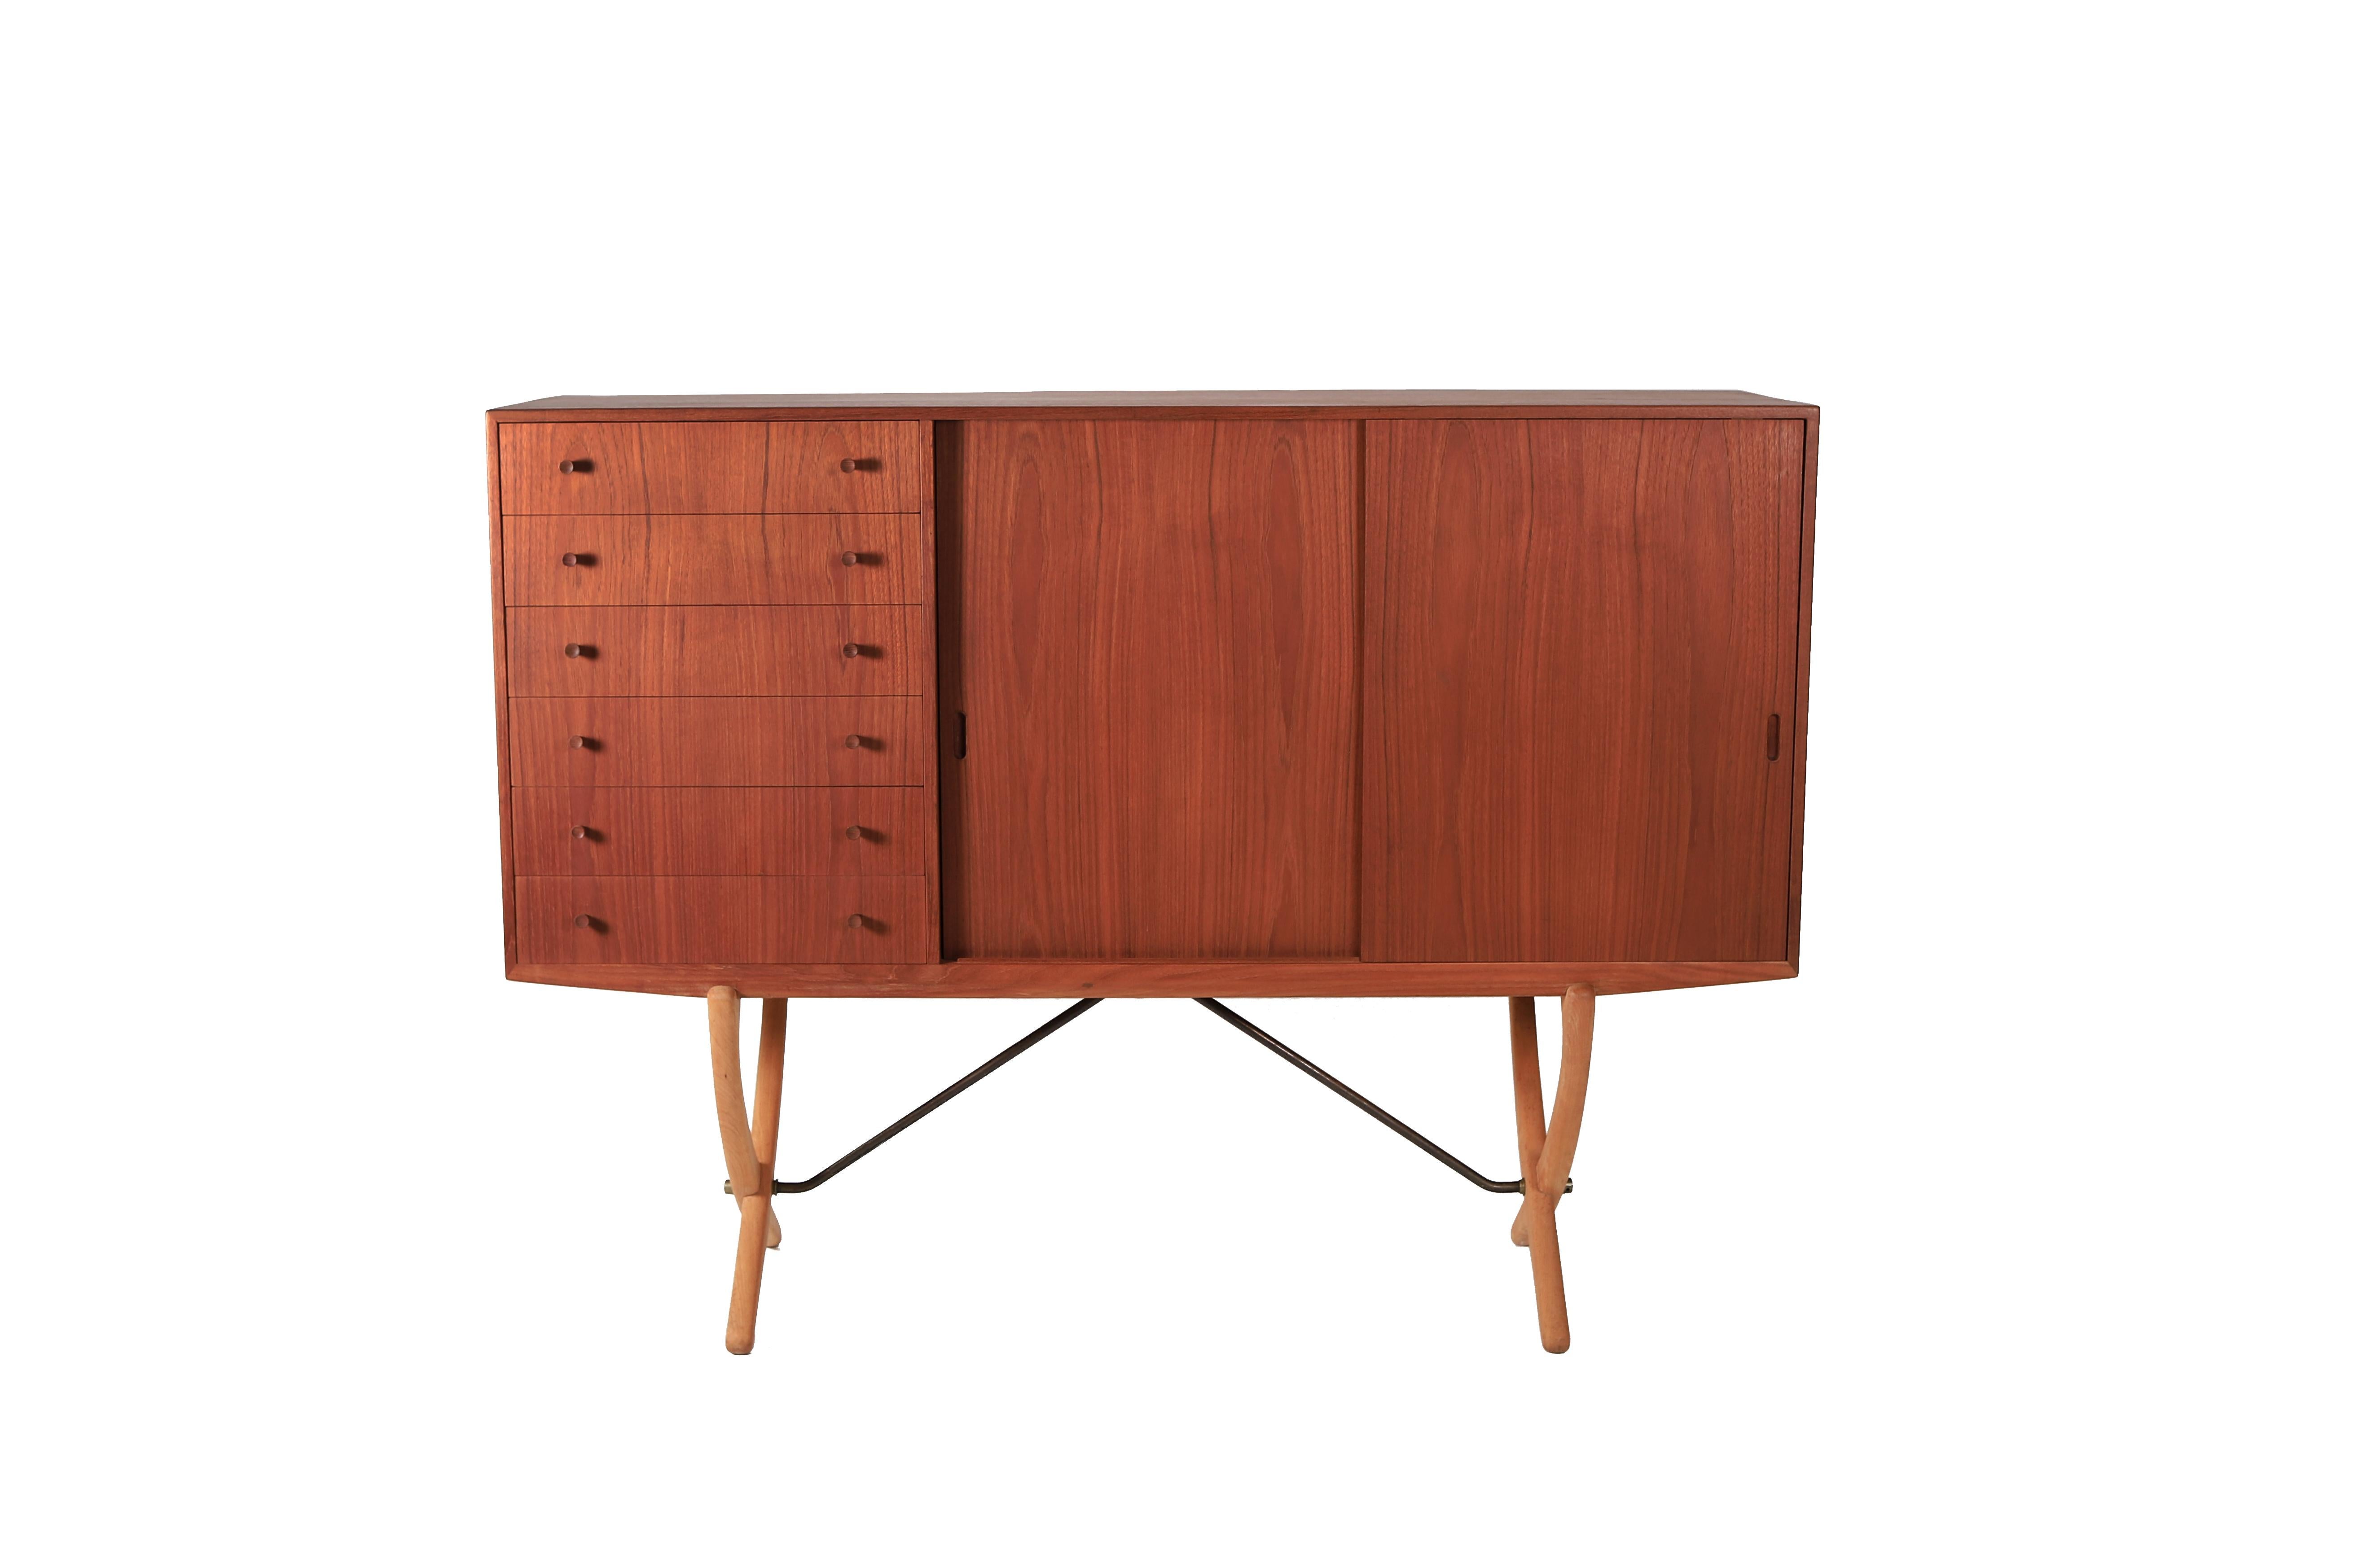 A superlative example of the Hans Wegner designed CH 304 saber leg sideboard. A piece that showcases the fine furniture making by Carl Hansen & Son. This design with the saber legs is the harder to find version. Manufactured in teak with an oak